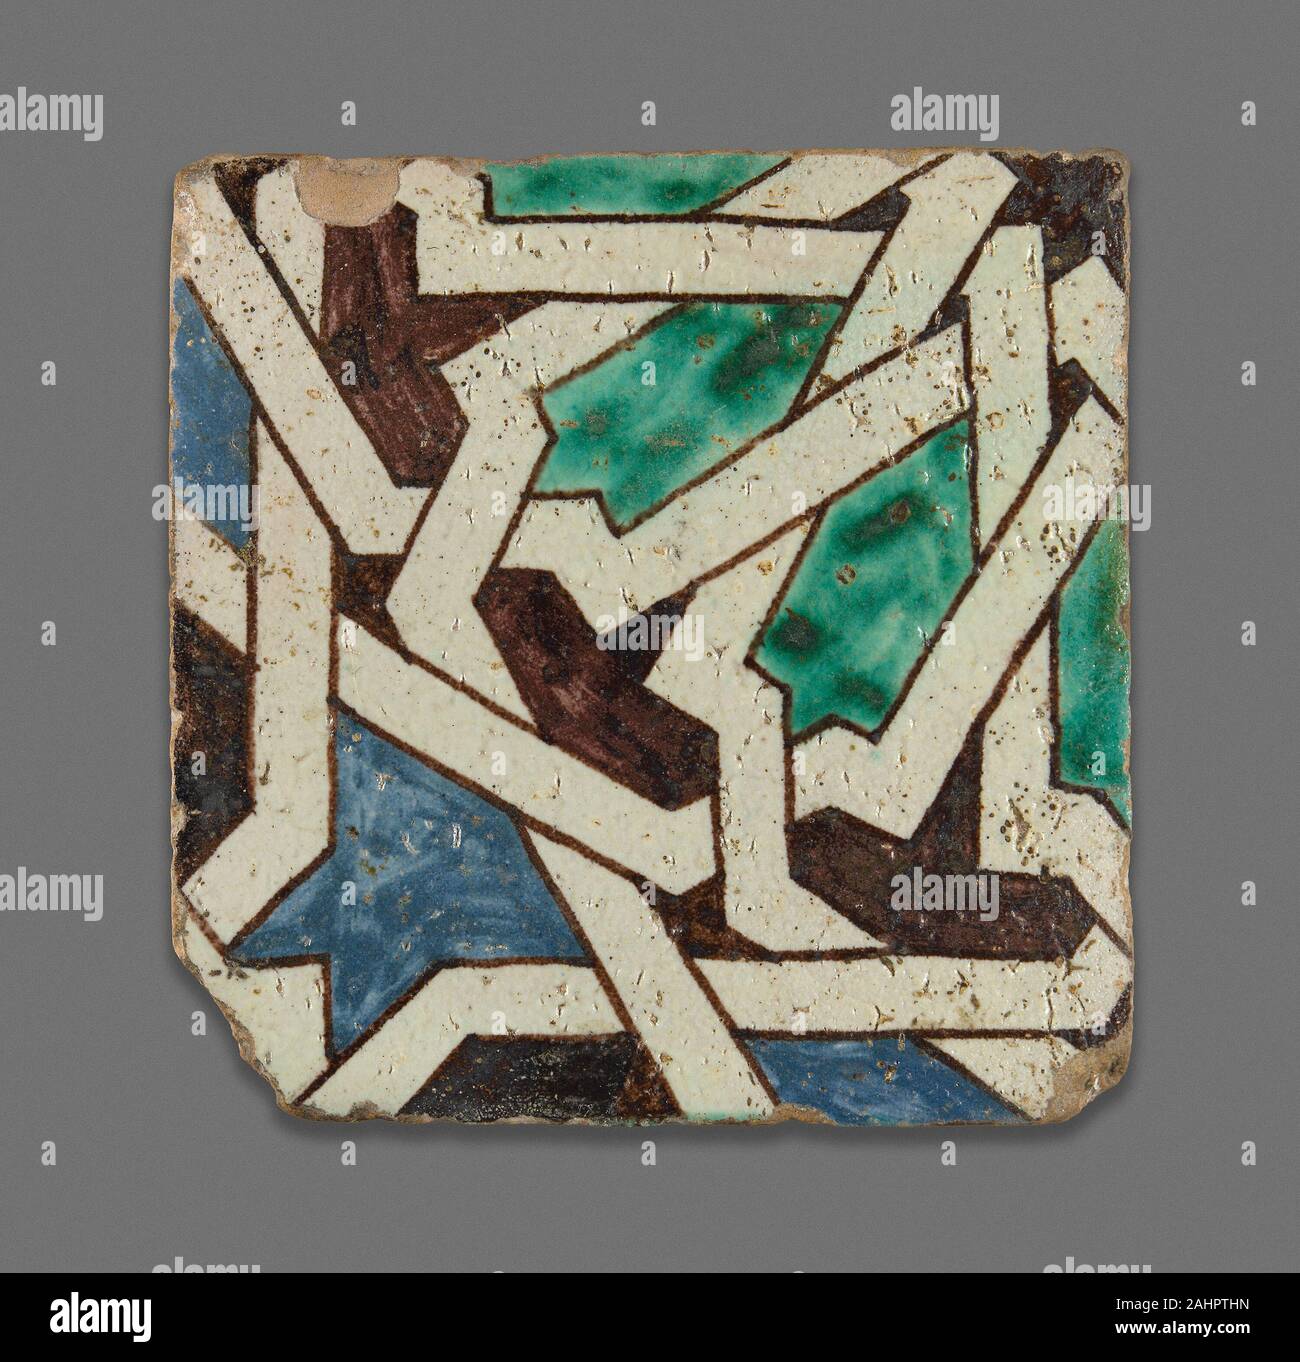 Square Tile. 1867–1899. Morocco. Polychrome pigment applied over opaque white glaze Geometric tilework comprised of individually cut pieces, or zillij, is a prominent feature of Moroccan architecture dating back more than 700 years. It is incredibly costly to make due to the skill involved in the design and layout of the mosaic. This imitation zillij tile achieves a similar effect while reducing the cost of labor and materials, and it speaks to the enduring importance of the zillij style as a highly prized art form in 19th-century Morocco. In an architectural context, numerous zilij tiles woul Stock Photo